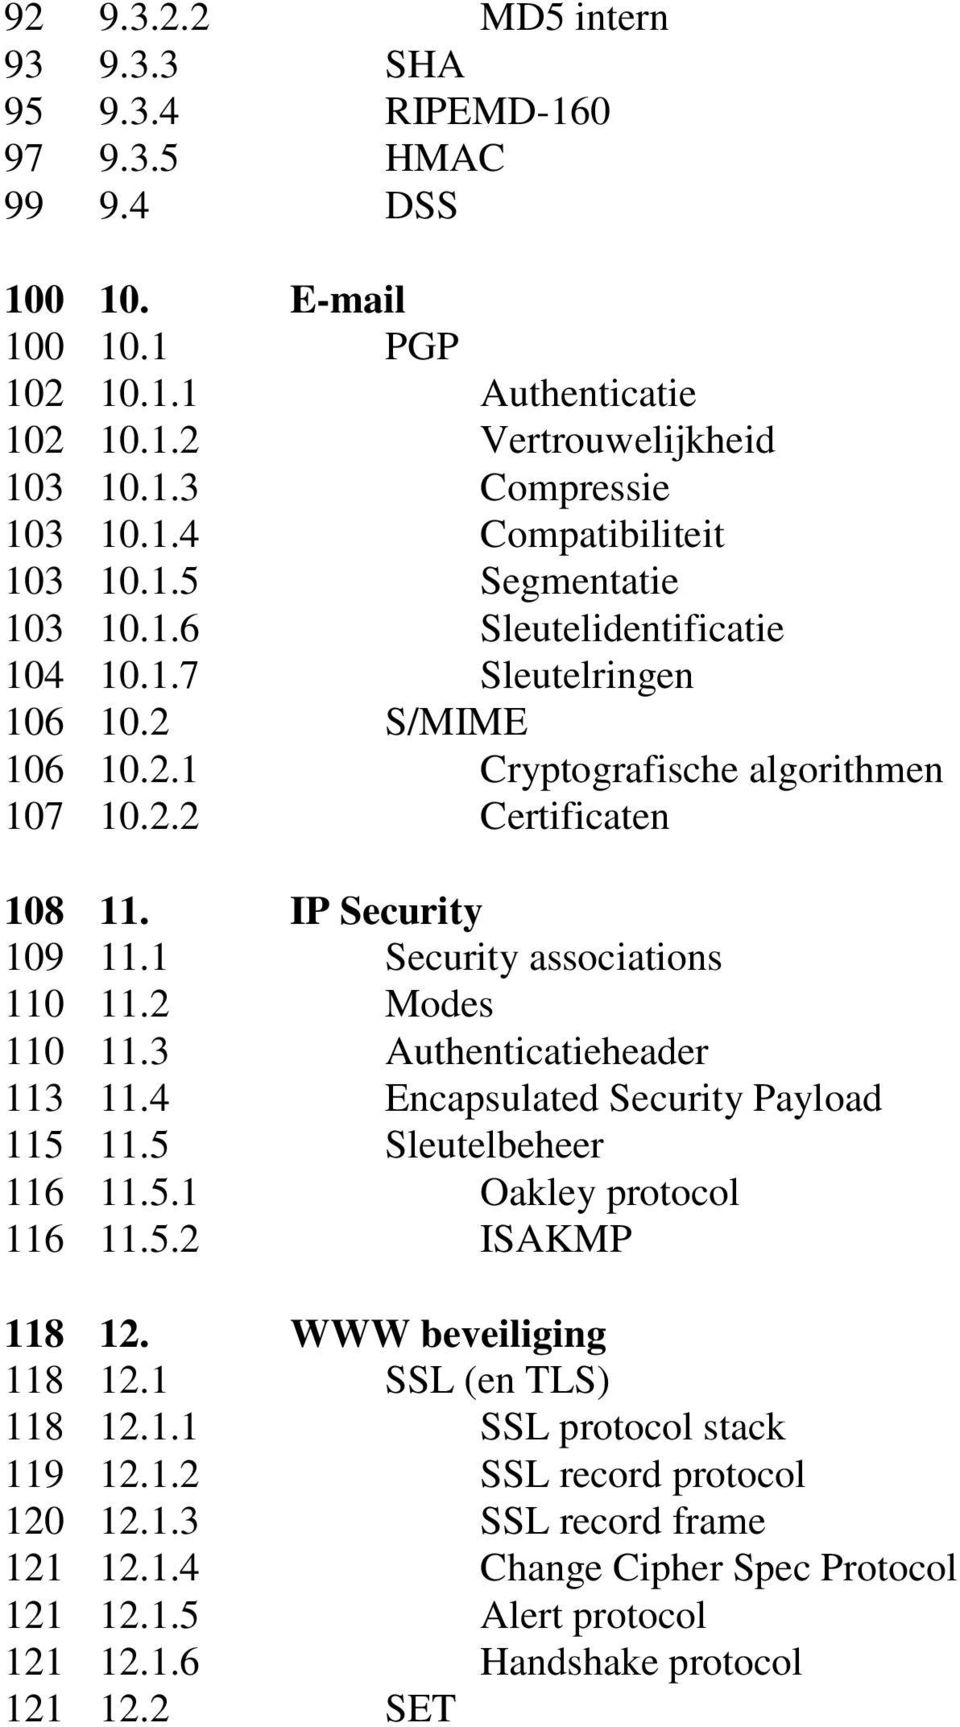 1 Security associations 110 11.2 Modes 110 11.3 Authenticatieheader 113 11.4 Encapsulated Security Payload 115 11.5 Sleutelbeheer 116 11.5.1 Oakley protocol 116 11.5.2 ISAKMP 118 12.